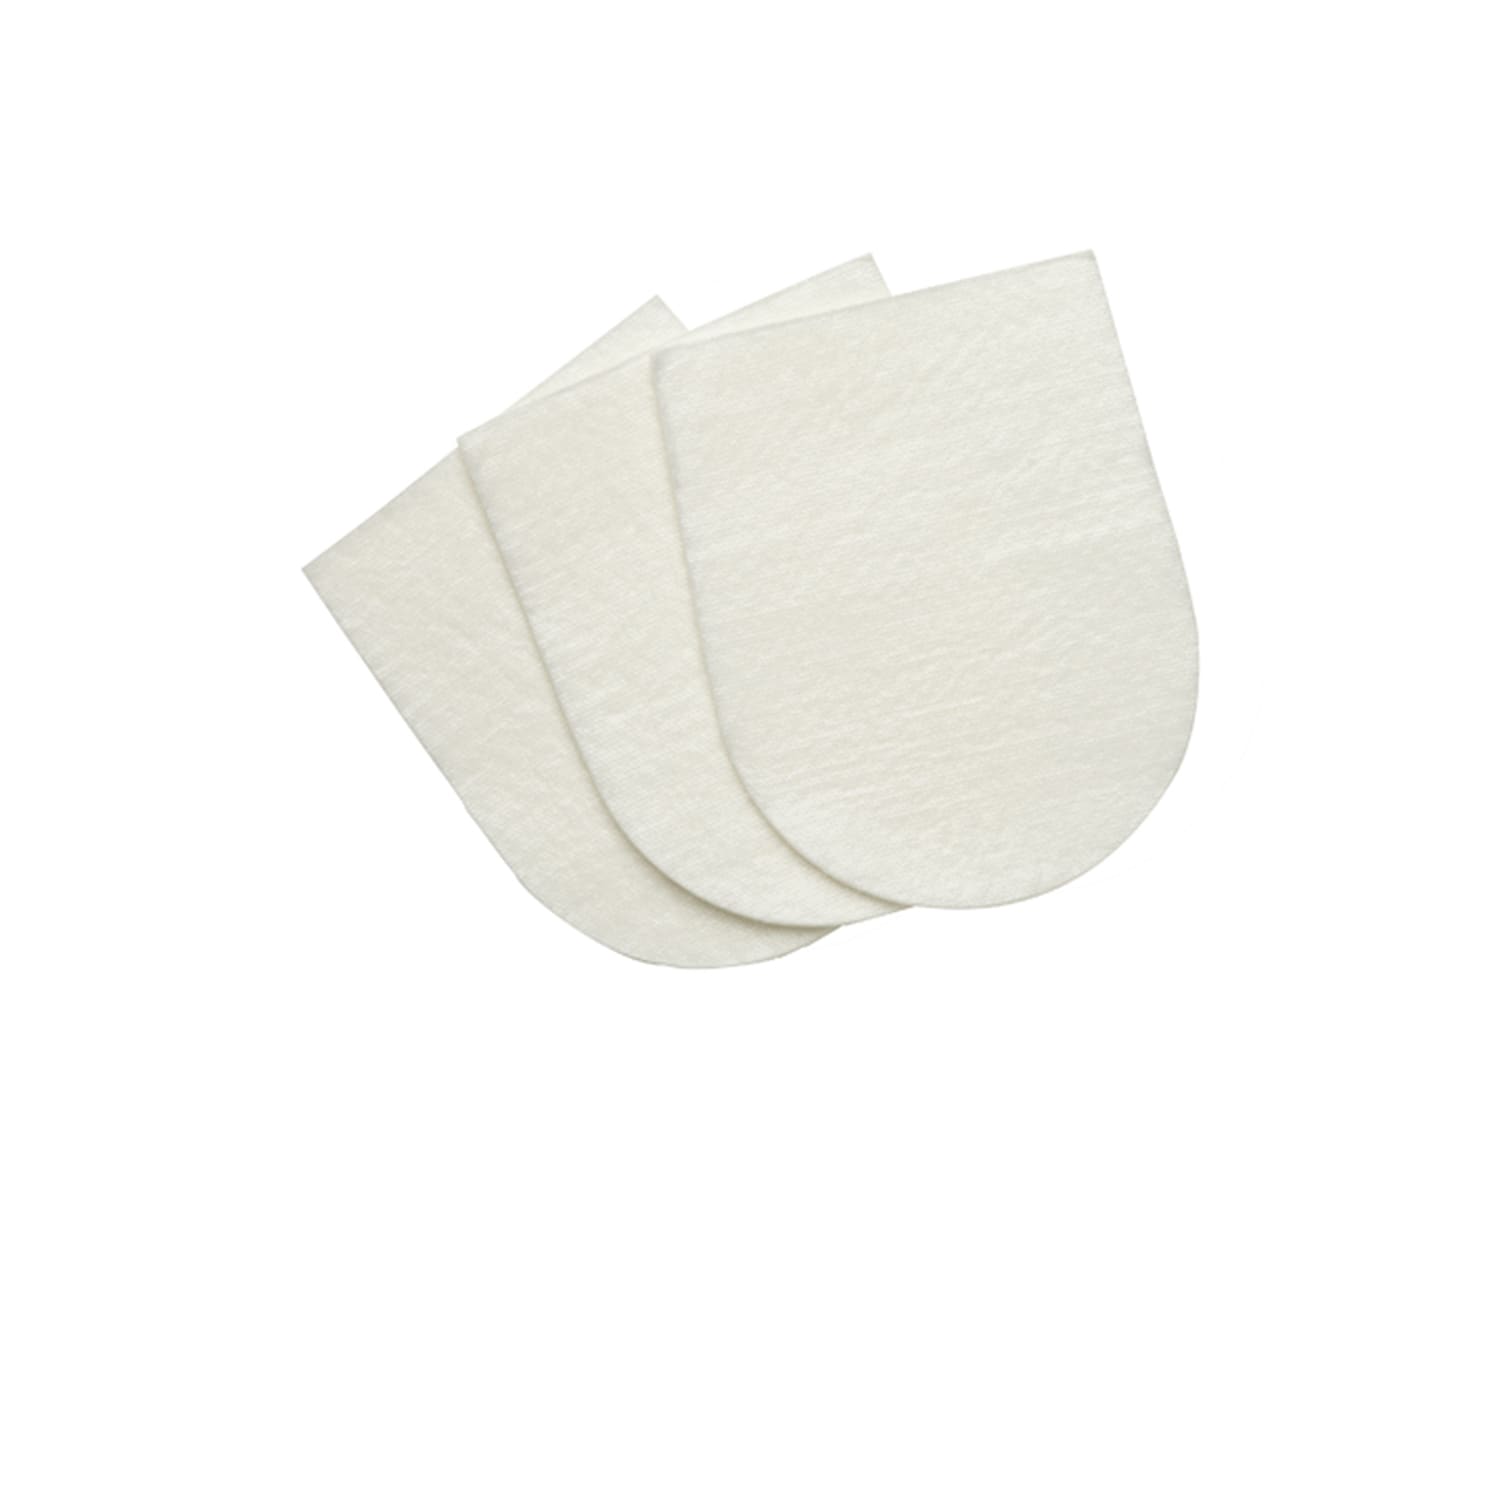 Photos - Other Pet Supplies Healers Medical Boot X-Small Gauze Pads, Pack of 8 280675 